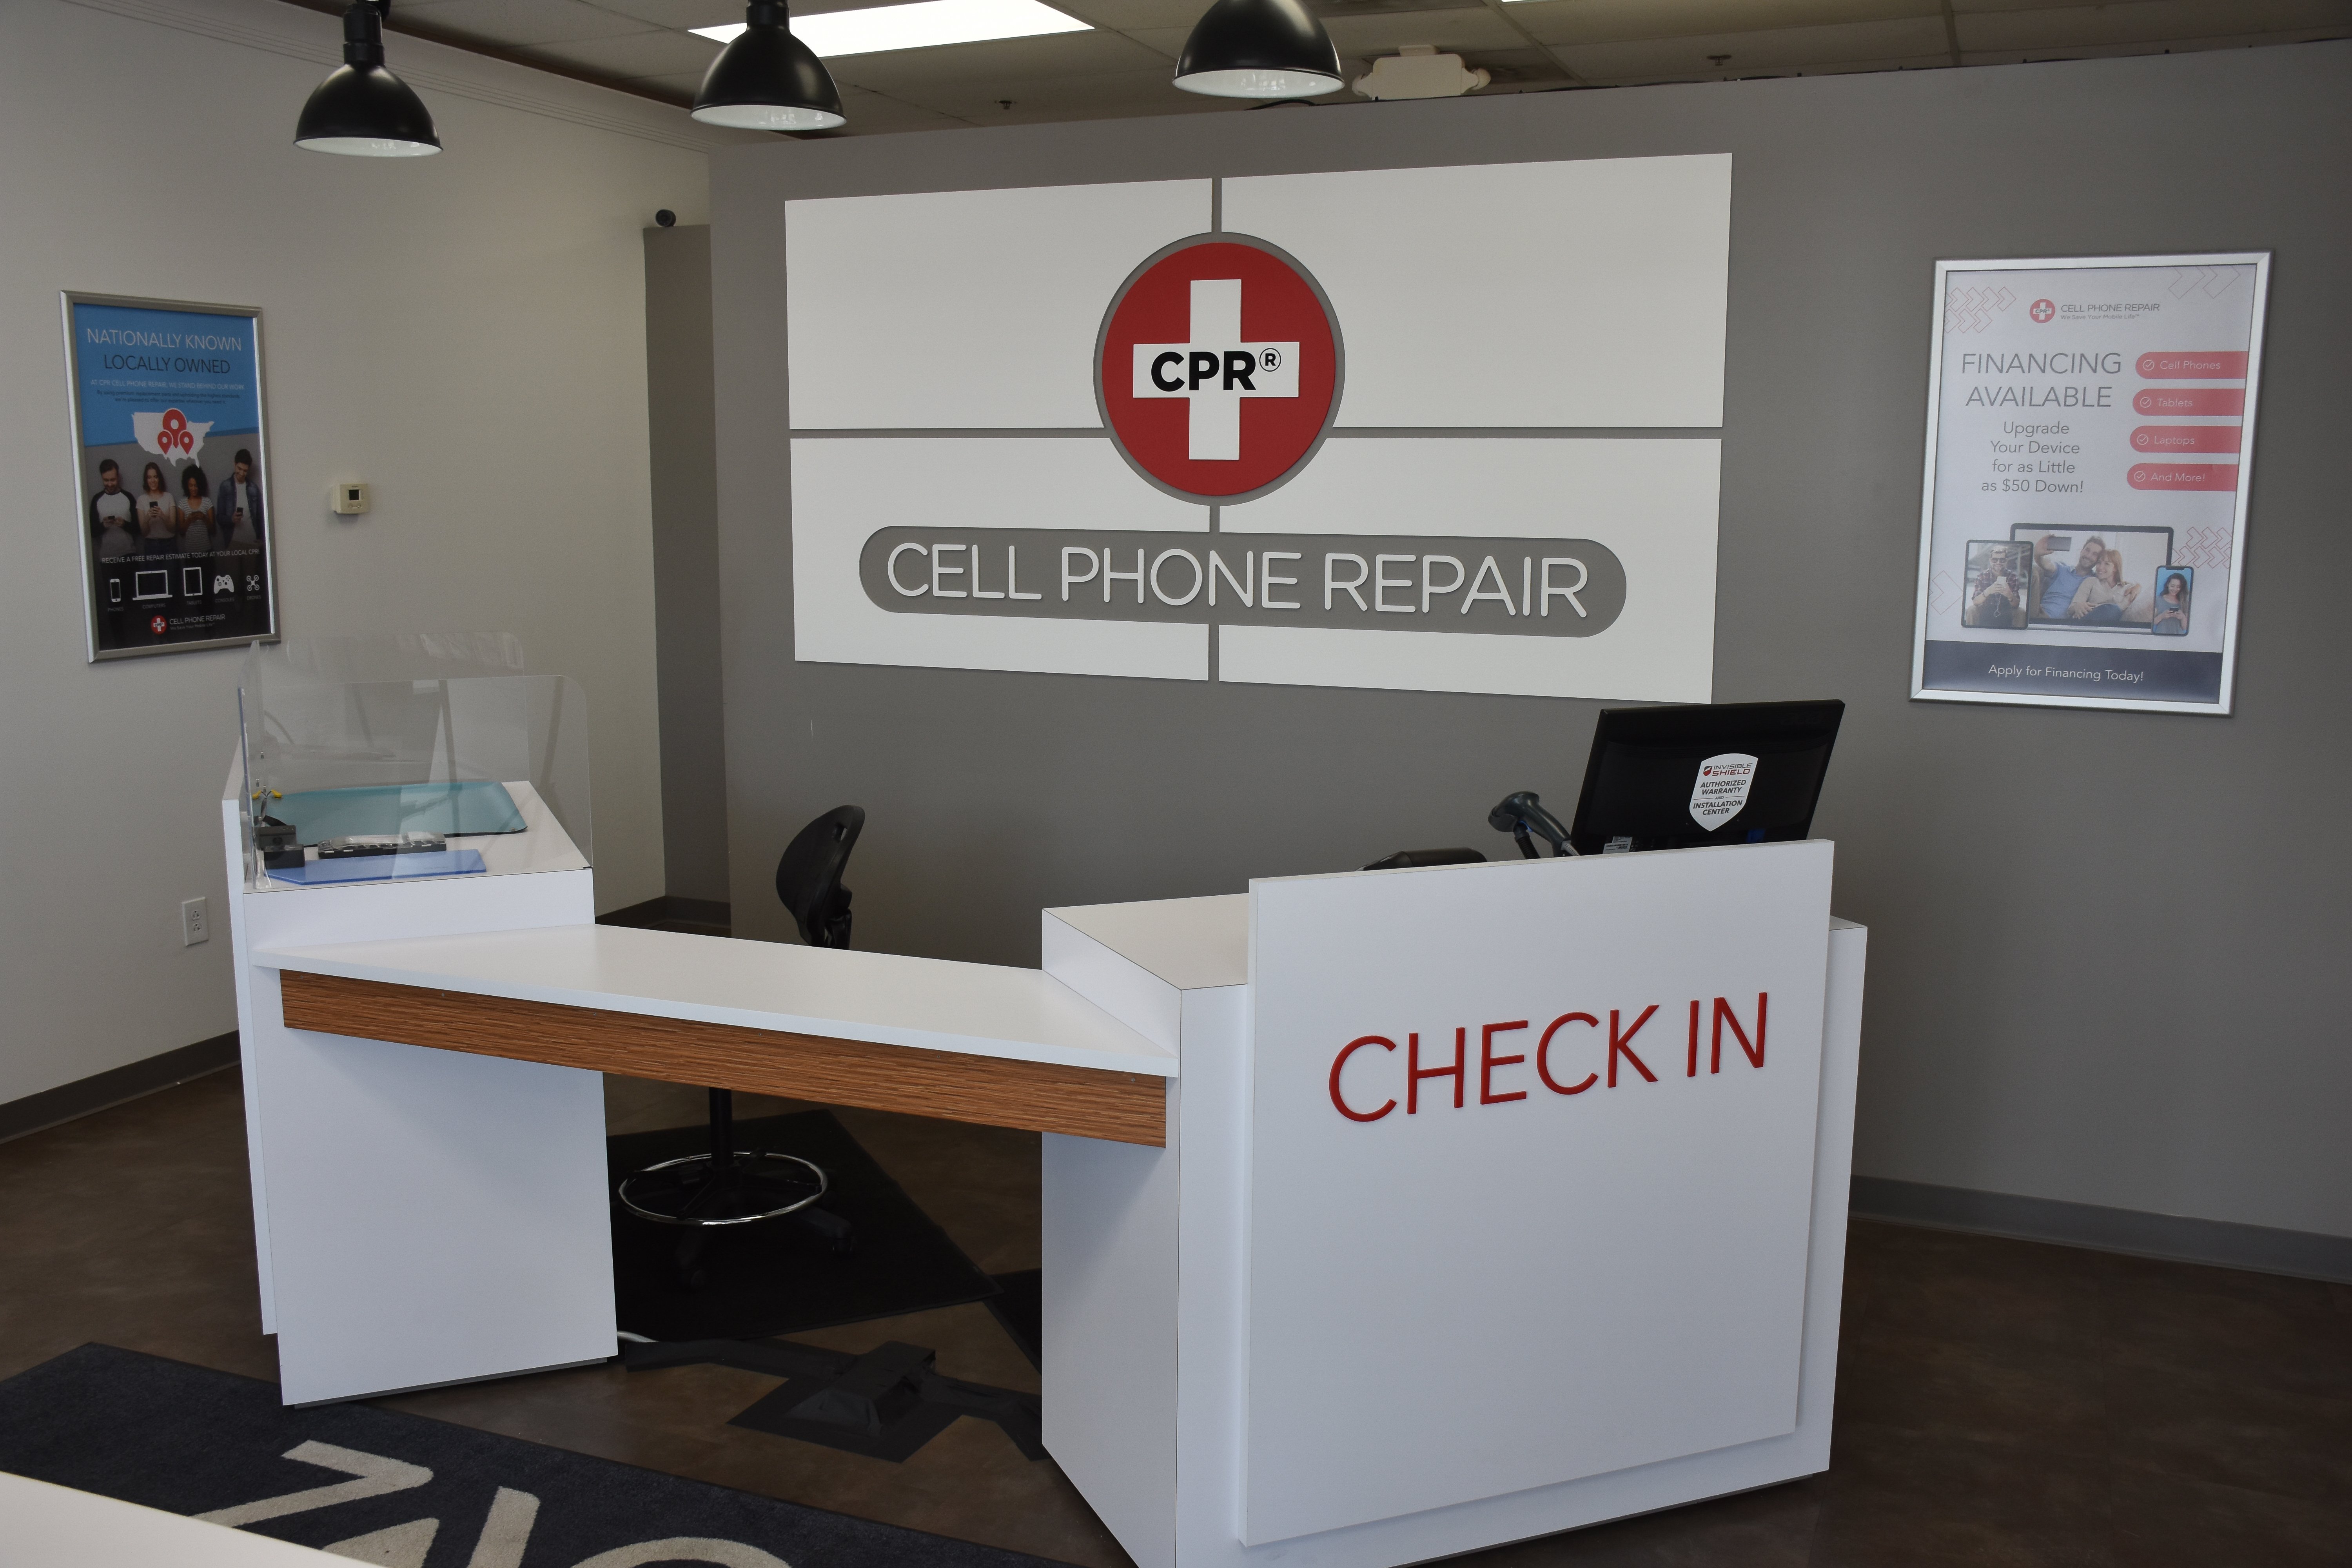 CPR Cell Phone Repair, Monday, June 7, 2021, Press release picture